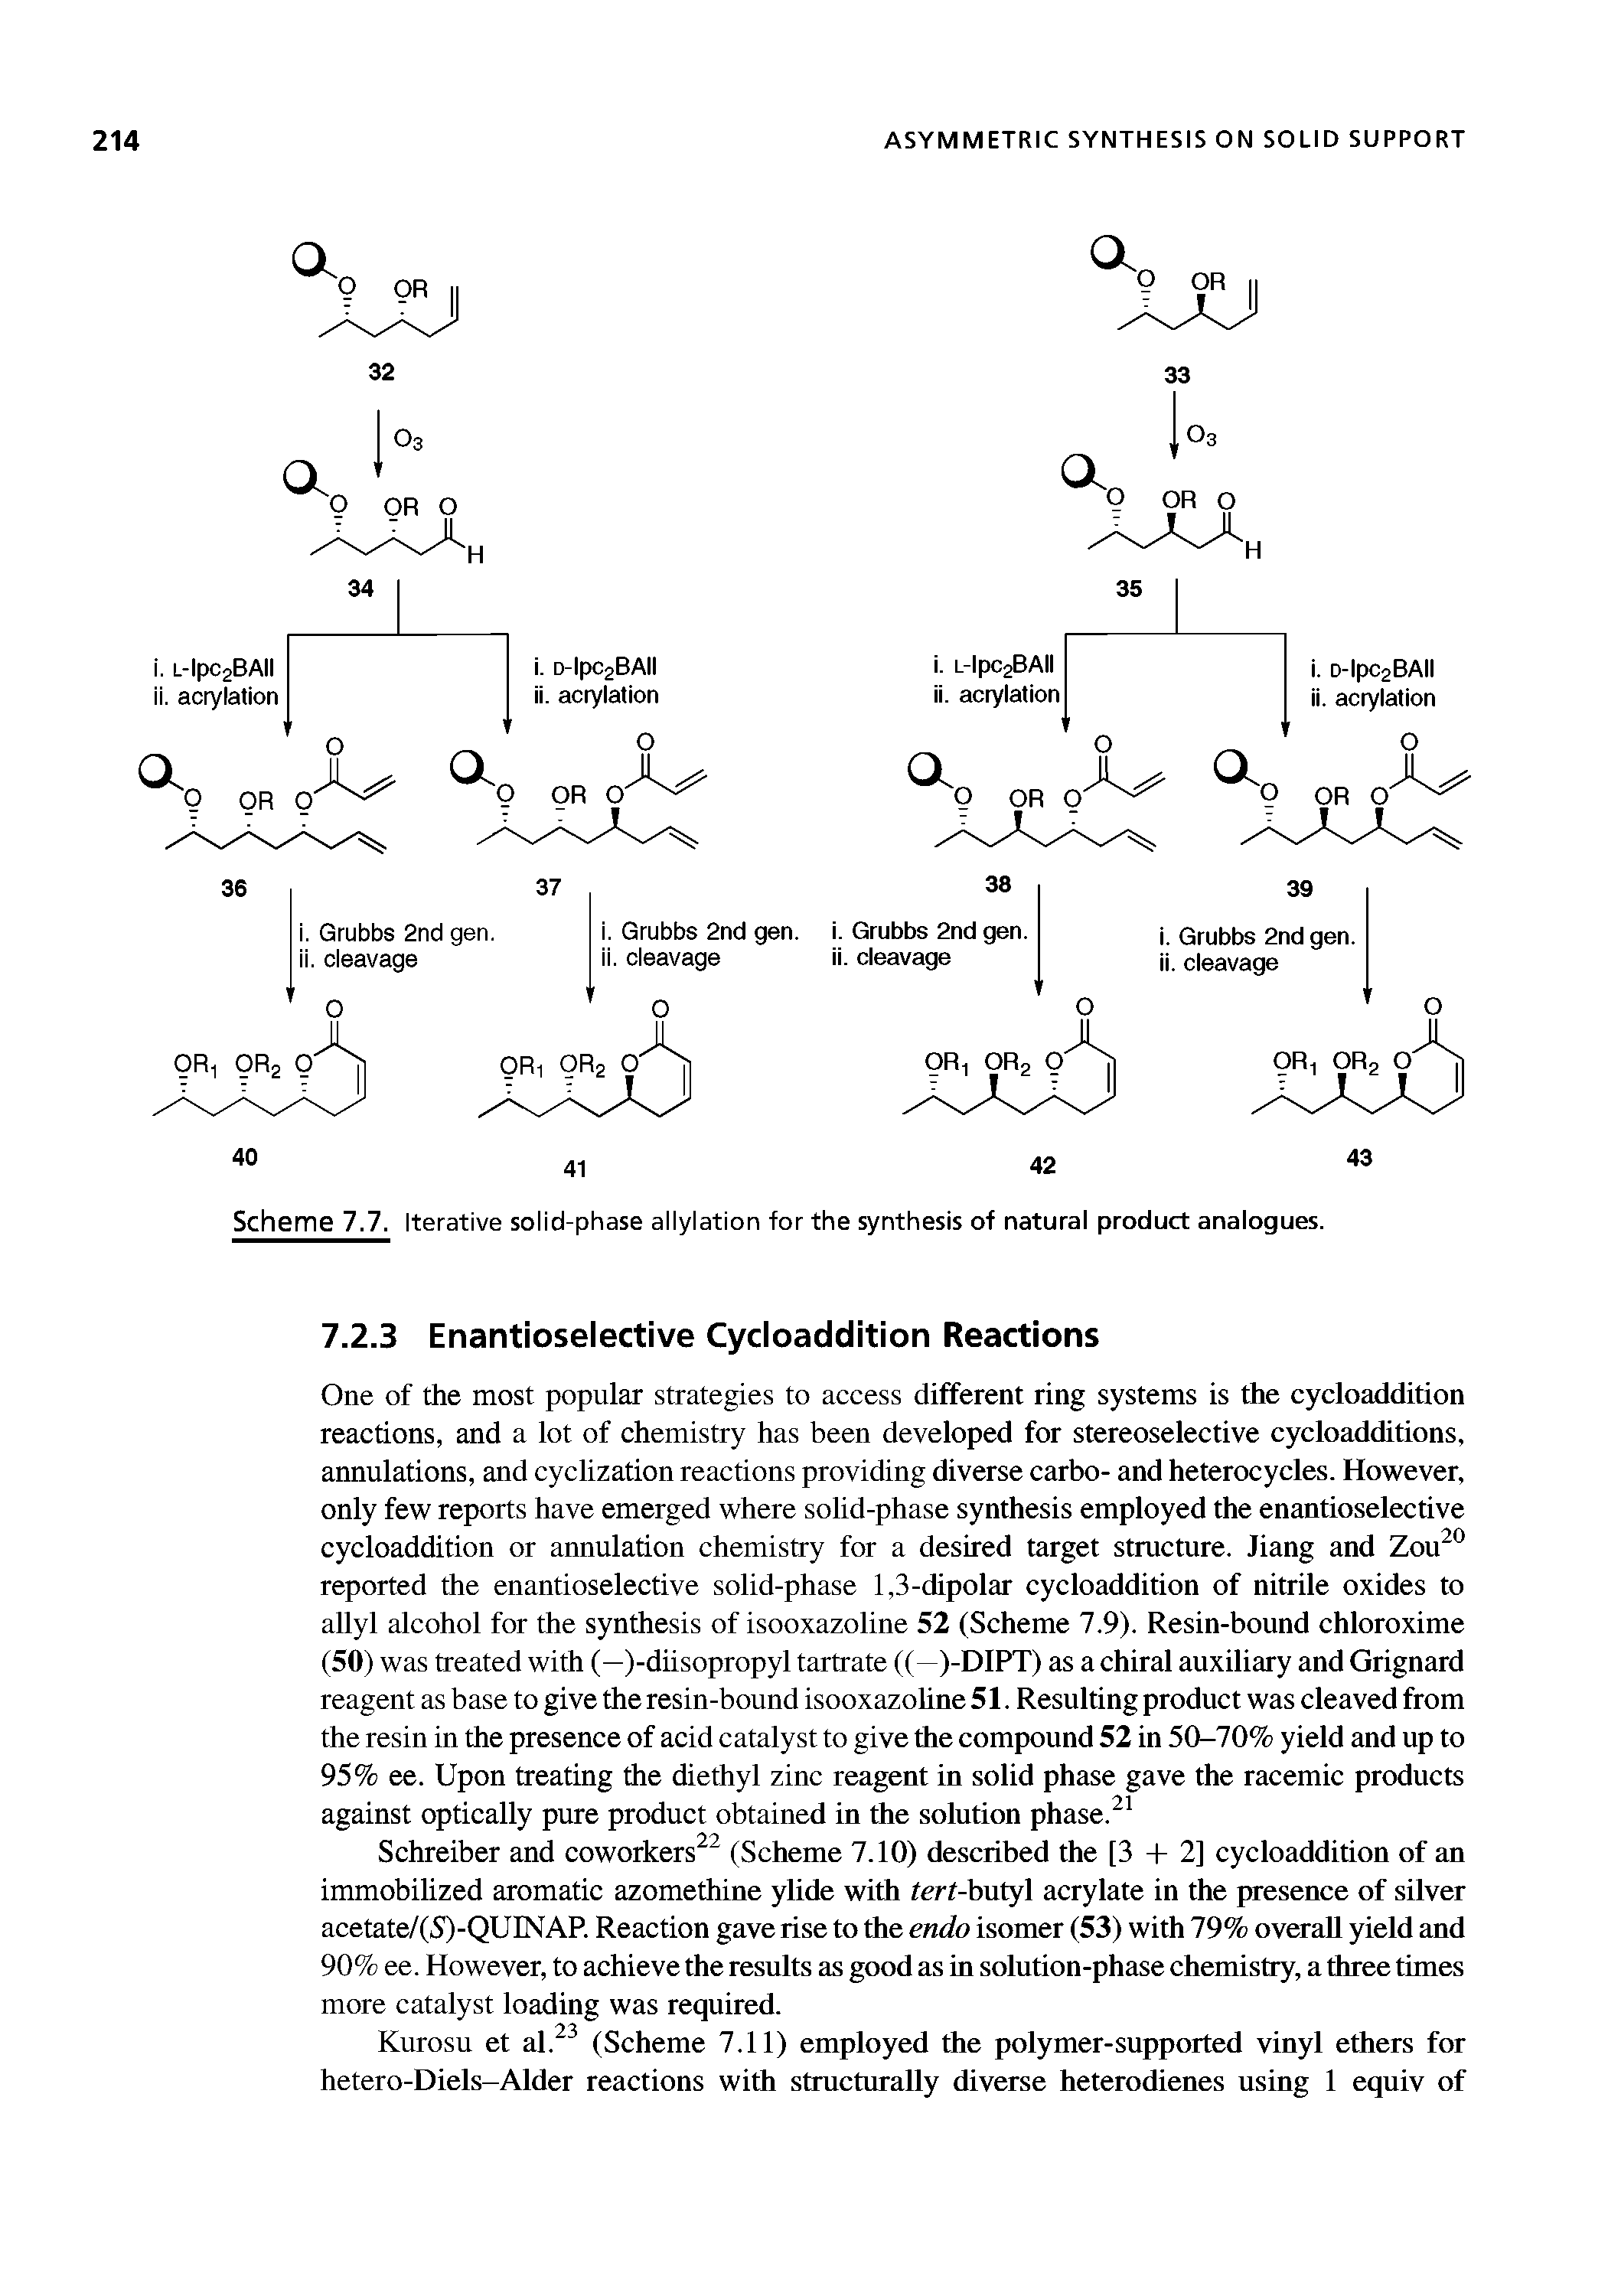 Scheme 7.7. Iterative solid-phase allylation for the synthesis of natural product analogues.